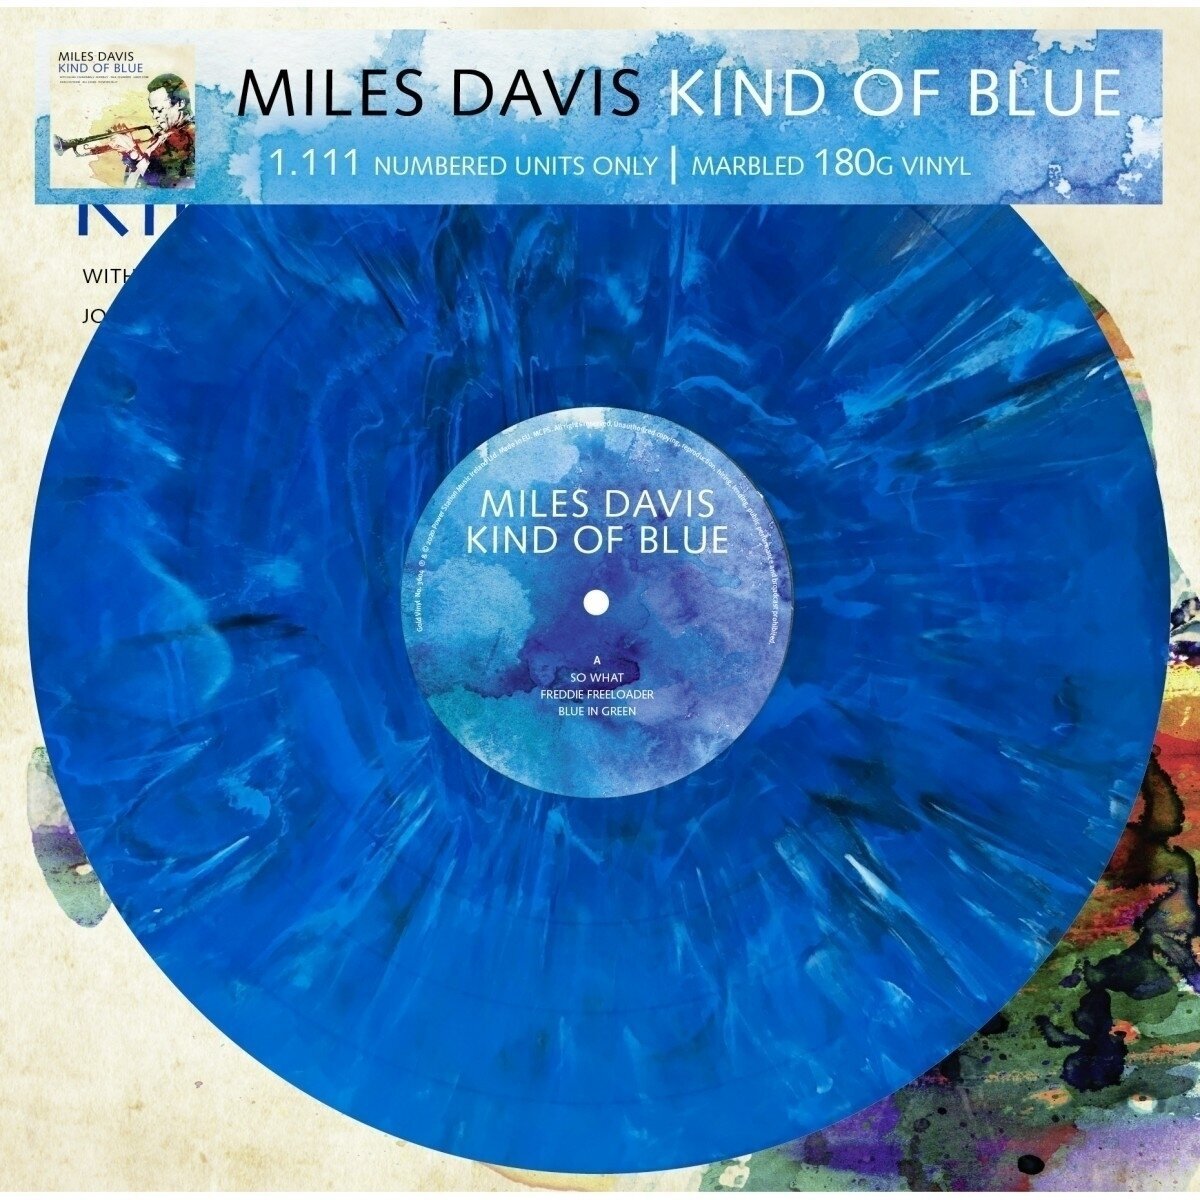 Vinyl Record Miles Davis - Kind Of Blue (Limited Edition) (Numbered) (Reissue) (Blue Marbled Coloured) (LP)